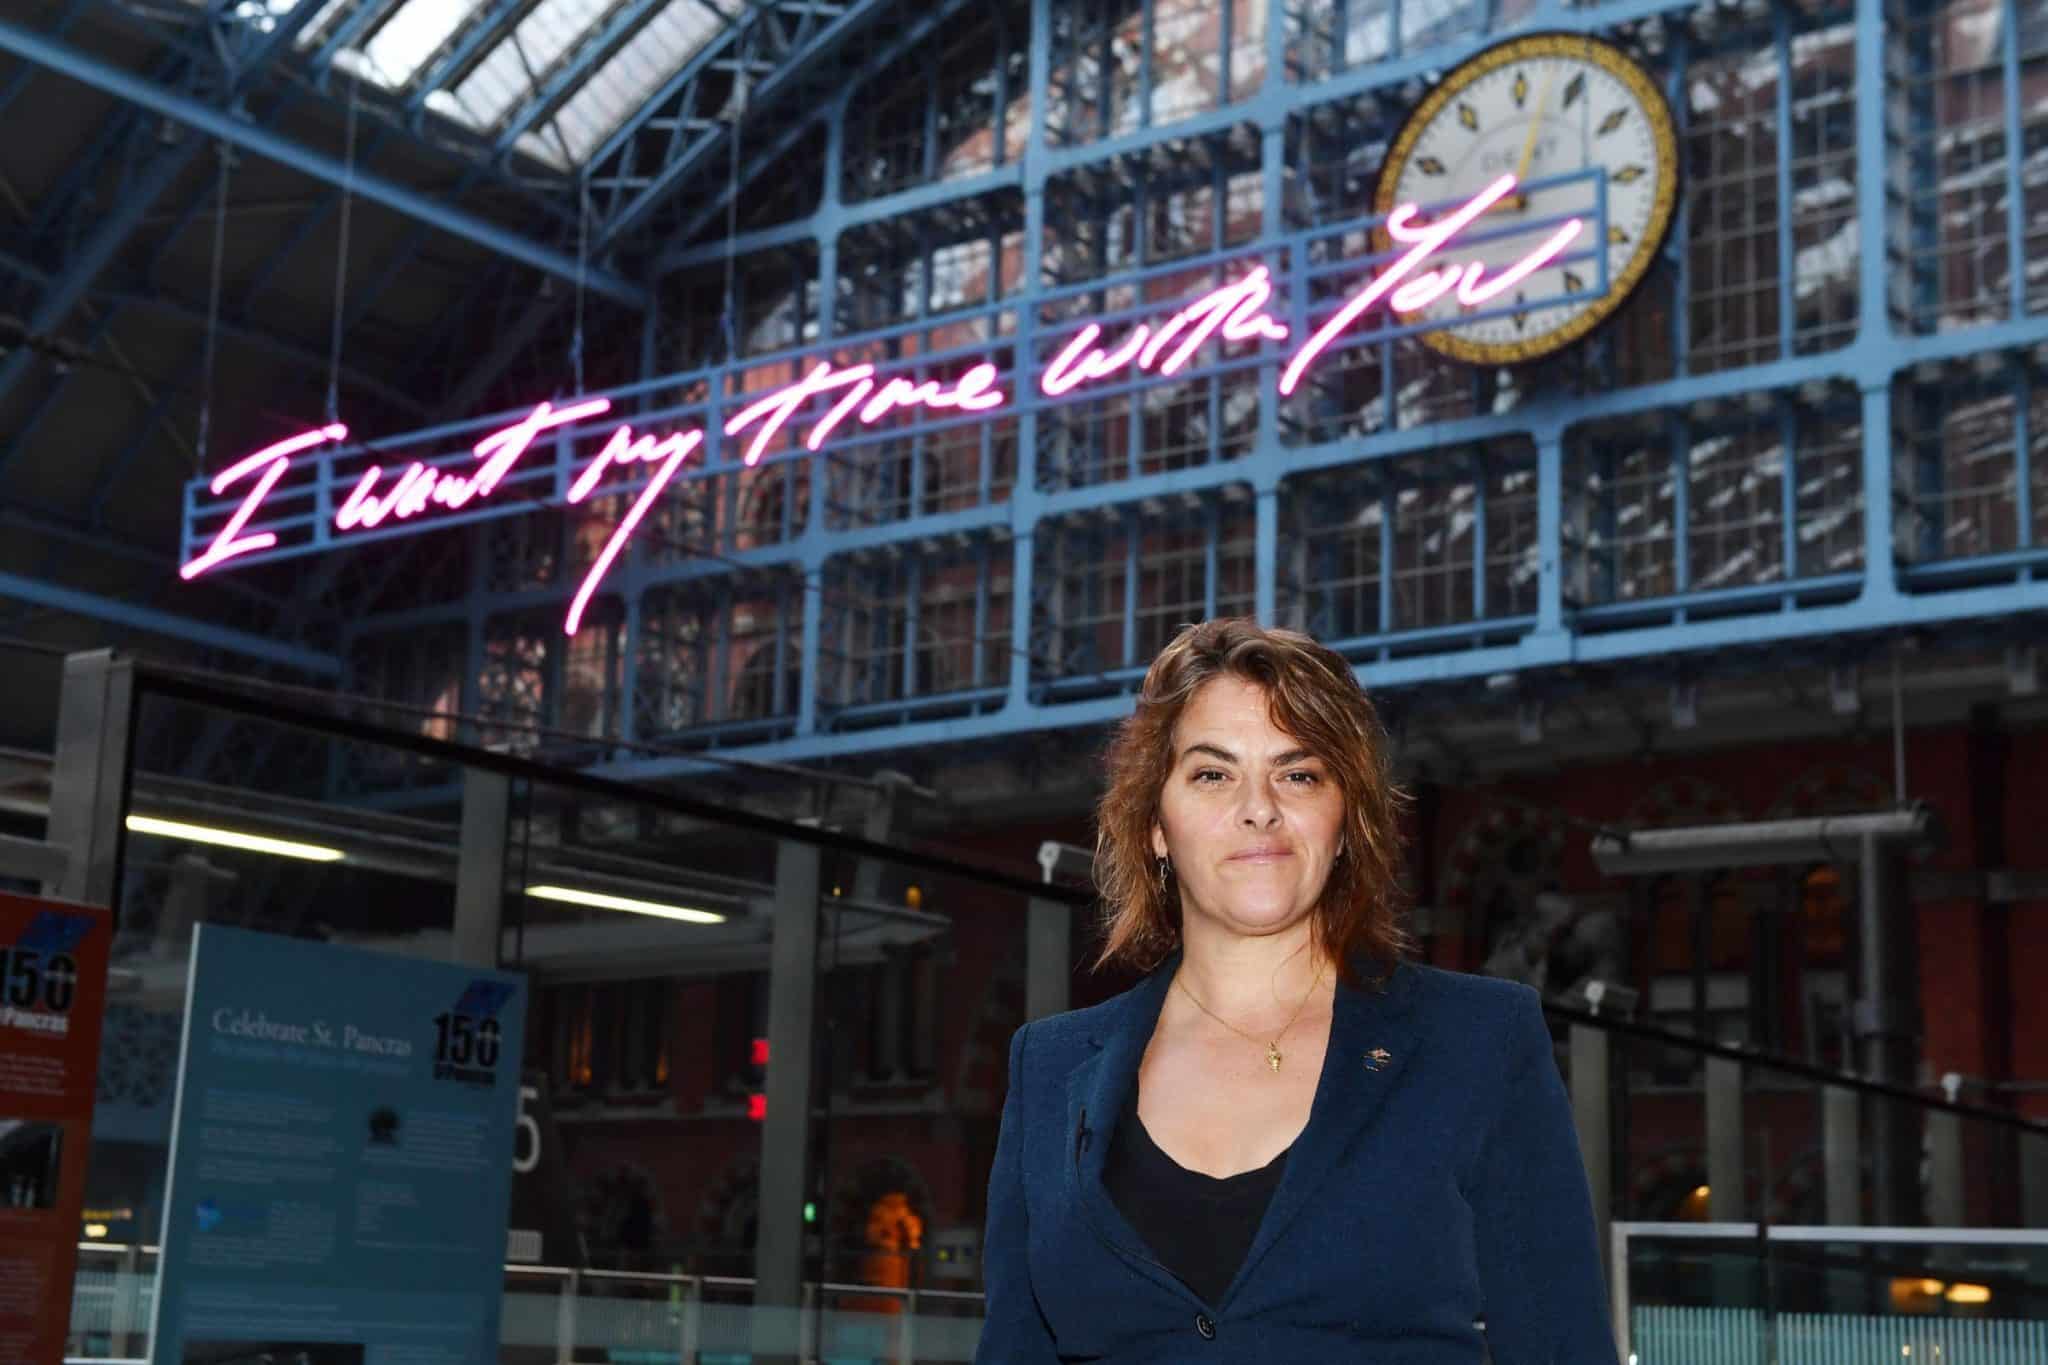 Tracey Emin I Want My Time With You St Pancrass